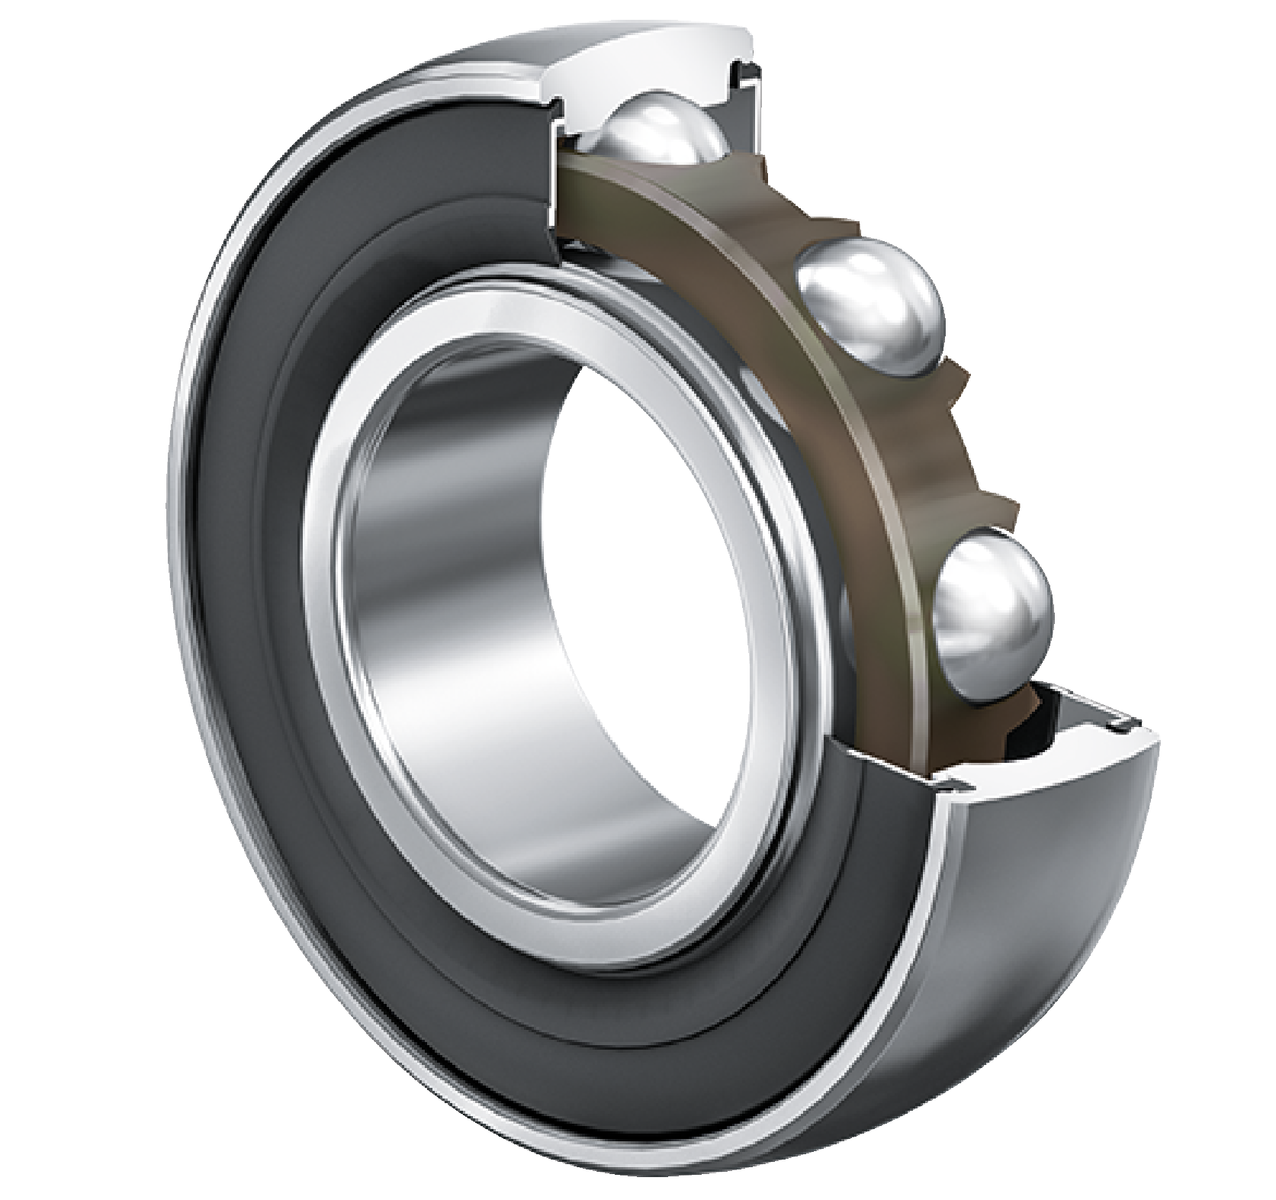 Self-Aligning Deep Groove Ball Bearing 2..-NPP-B, Spherical Outer Ring, Inner Ring for Fit, P Seals on Both Sides